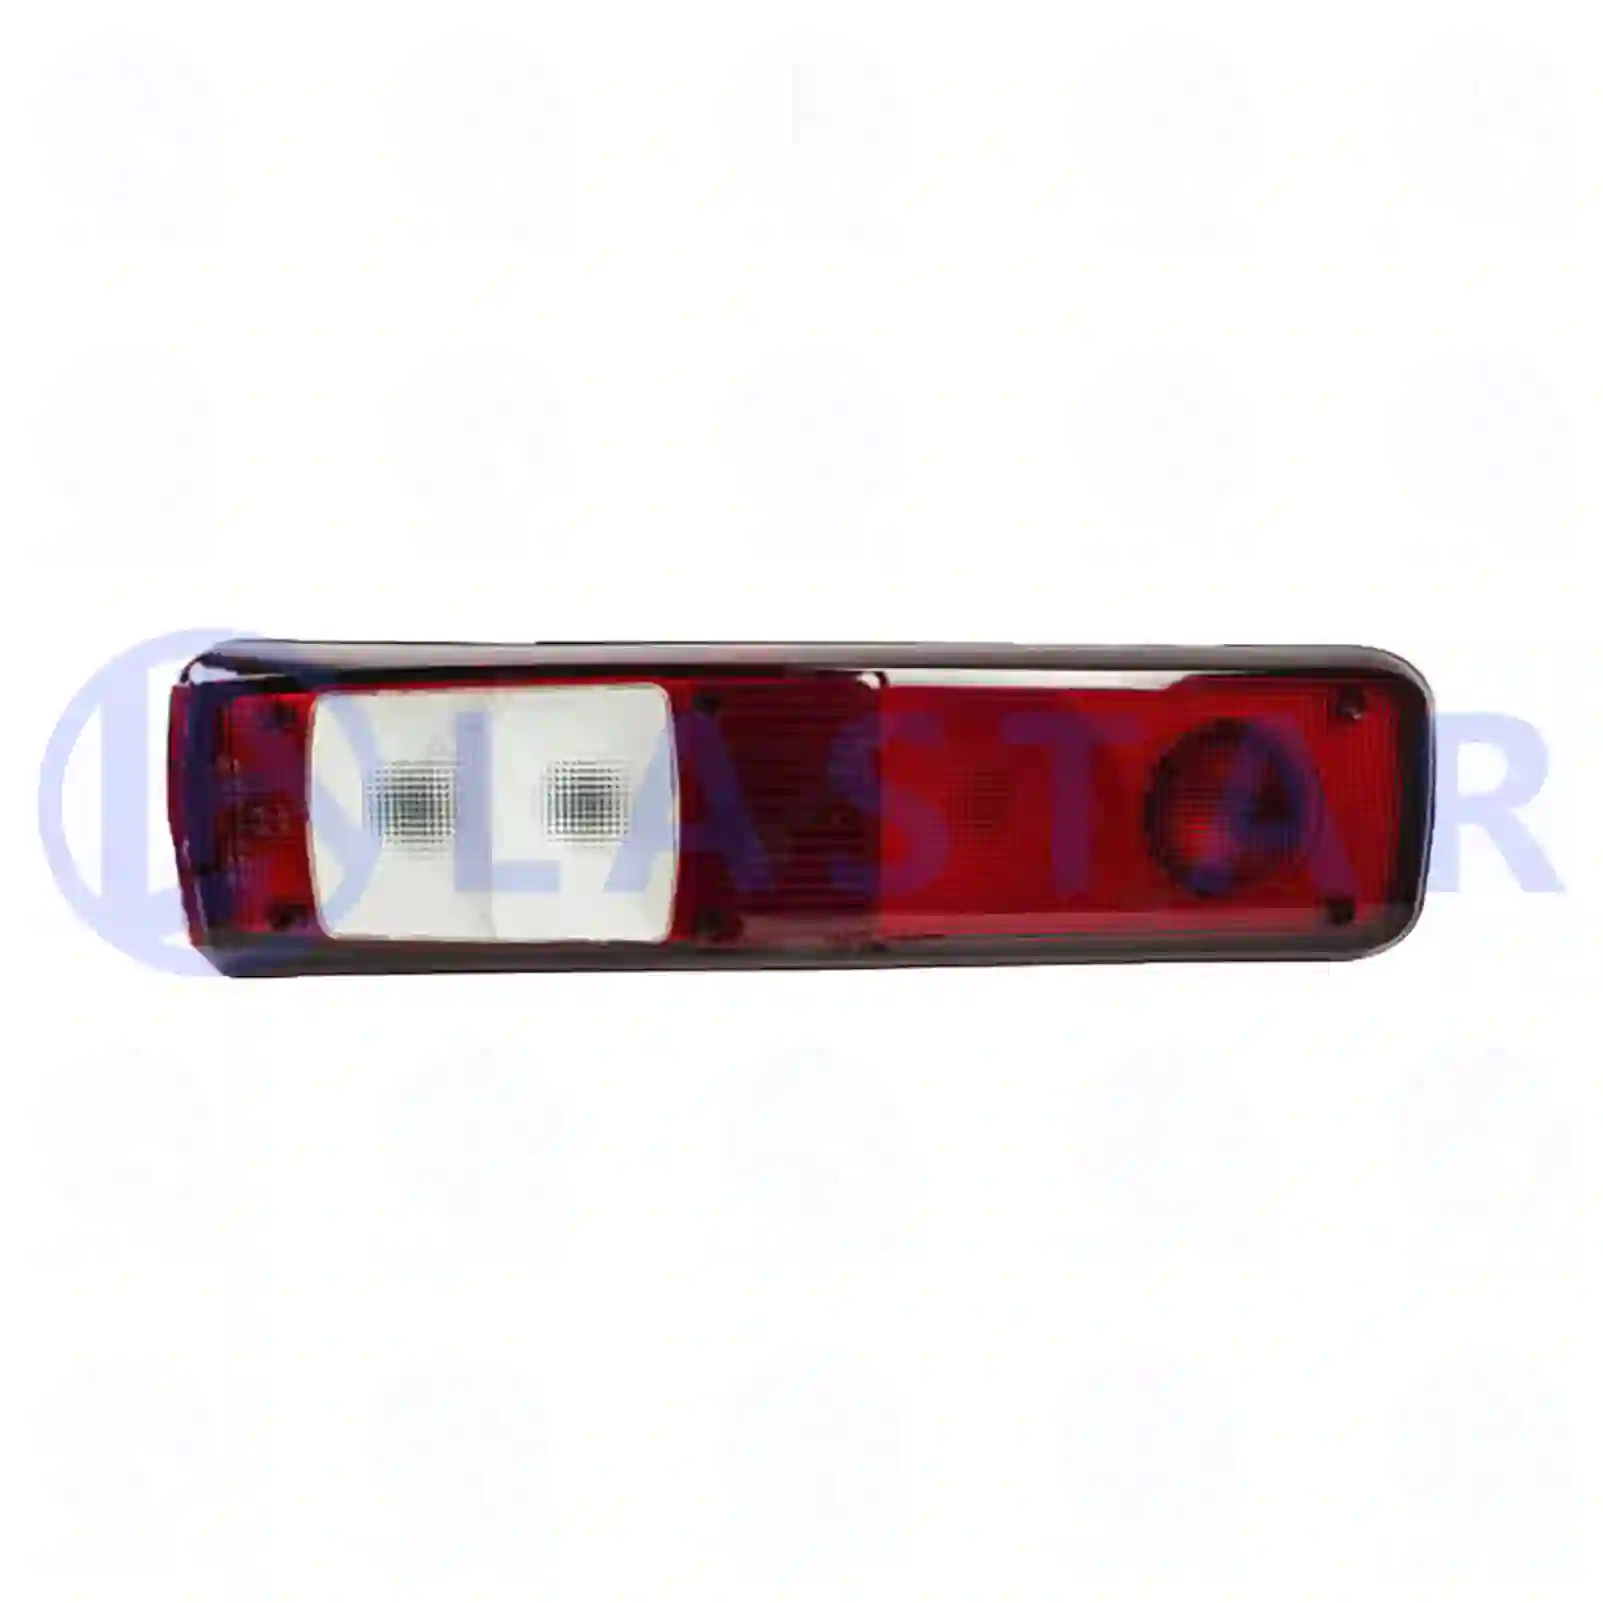 Tail lamp, left, 77711073, 7420802348, 20769775, 20802346, ZG21004-0008, , , ||  77711073 Lastar Spare Part | Truck Spare Parts, Auotomotive Spare Parts Tail lamp, left, 77711073, 7420802348, 20769775, 20802346, ZG21004-0008, , , ||  77711073 Lastar Spare Part | Truck Spare Parts, Auotomotive Spare Parts